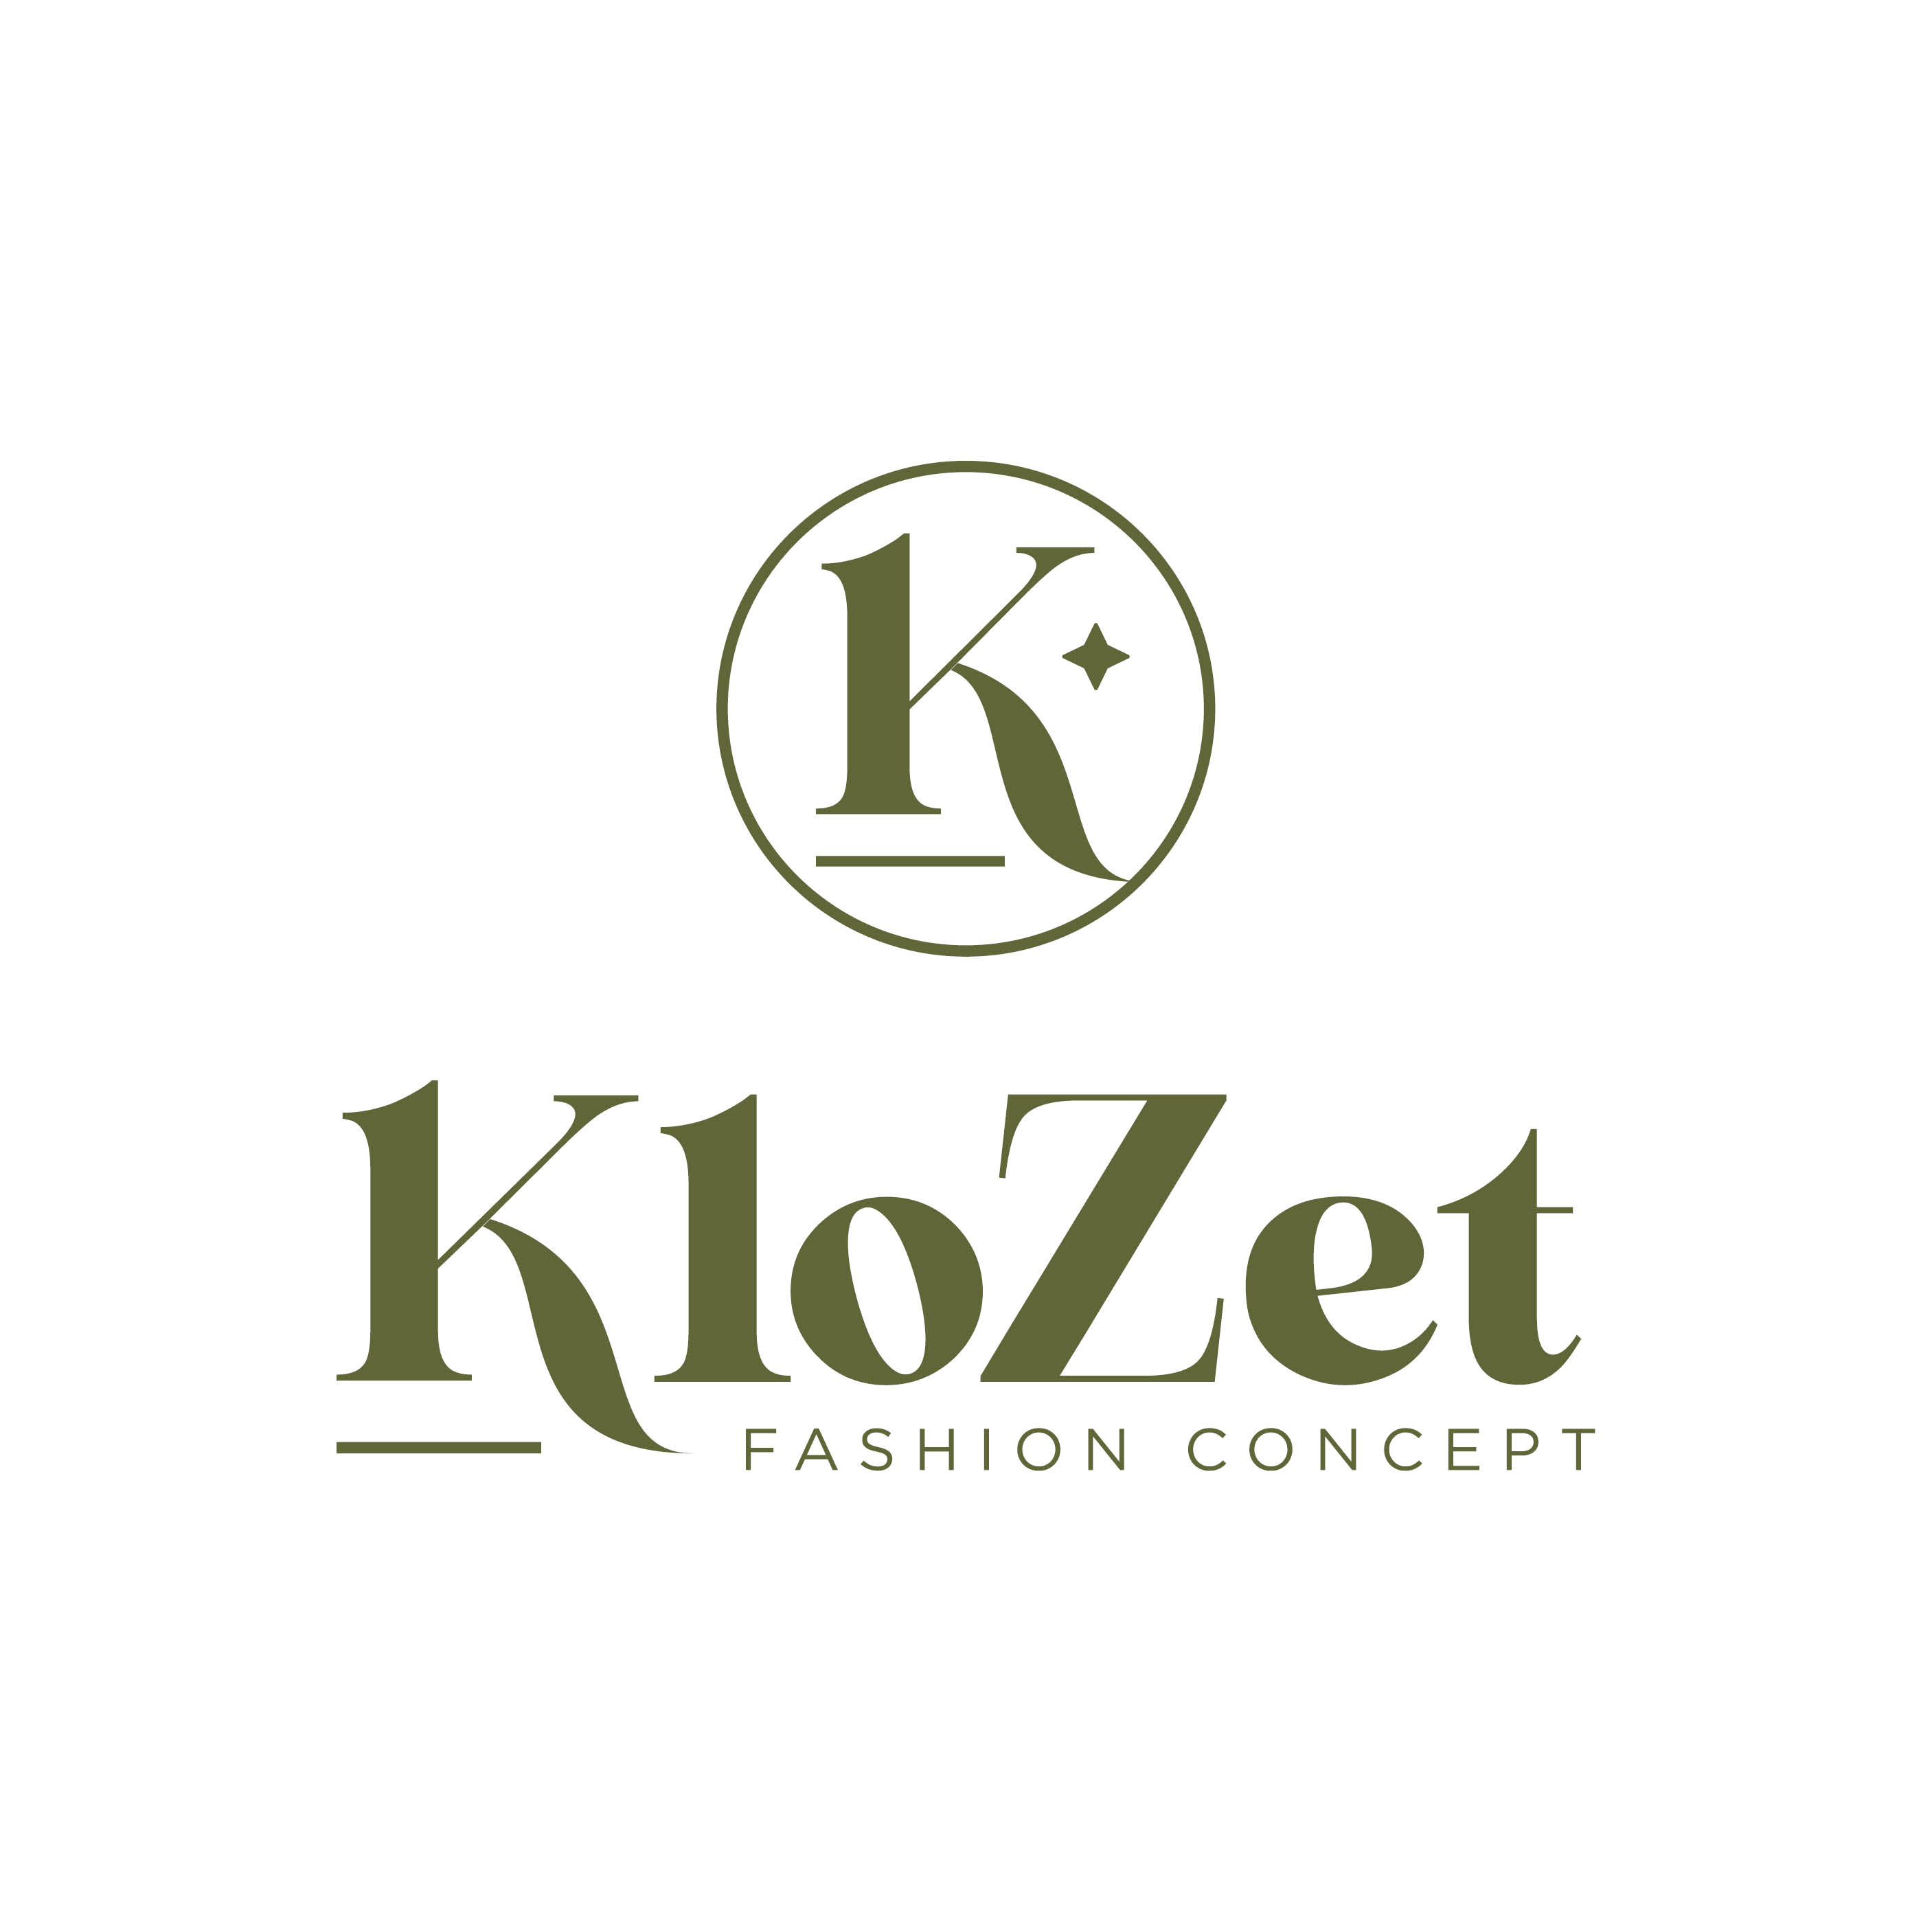 Klozet Logo logo design by logo designer Duffy Design Co for your inspiration and for the worlds largest logo competition